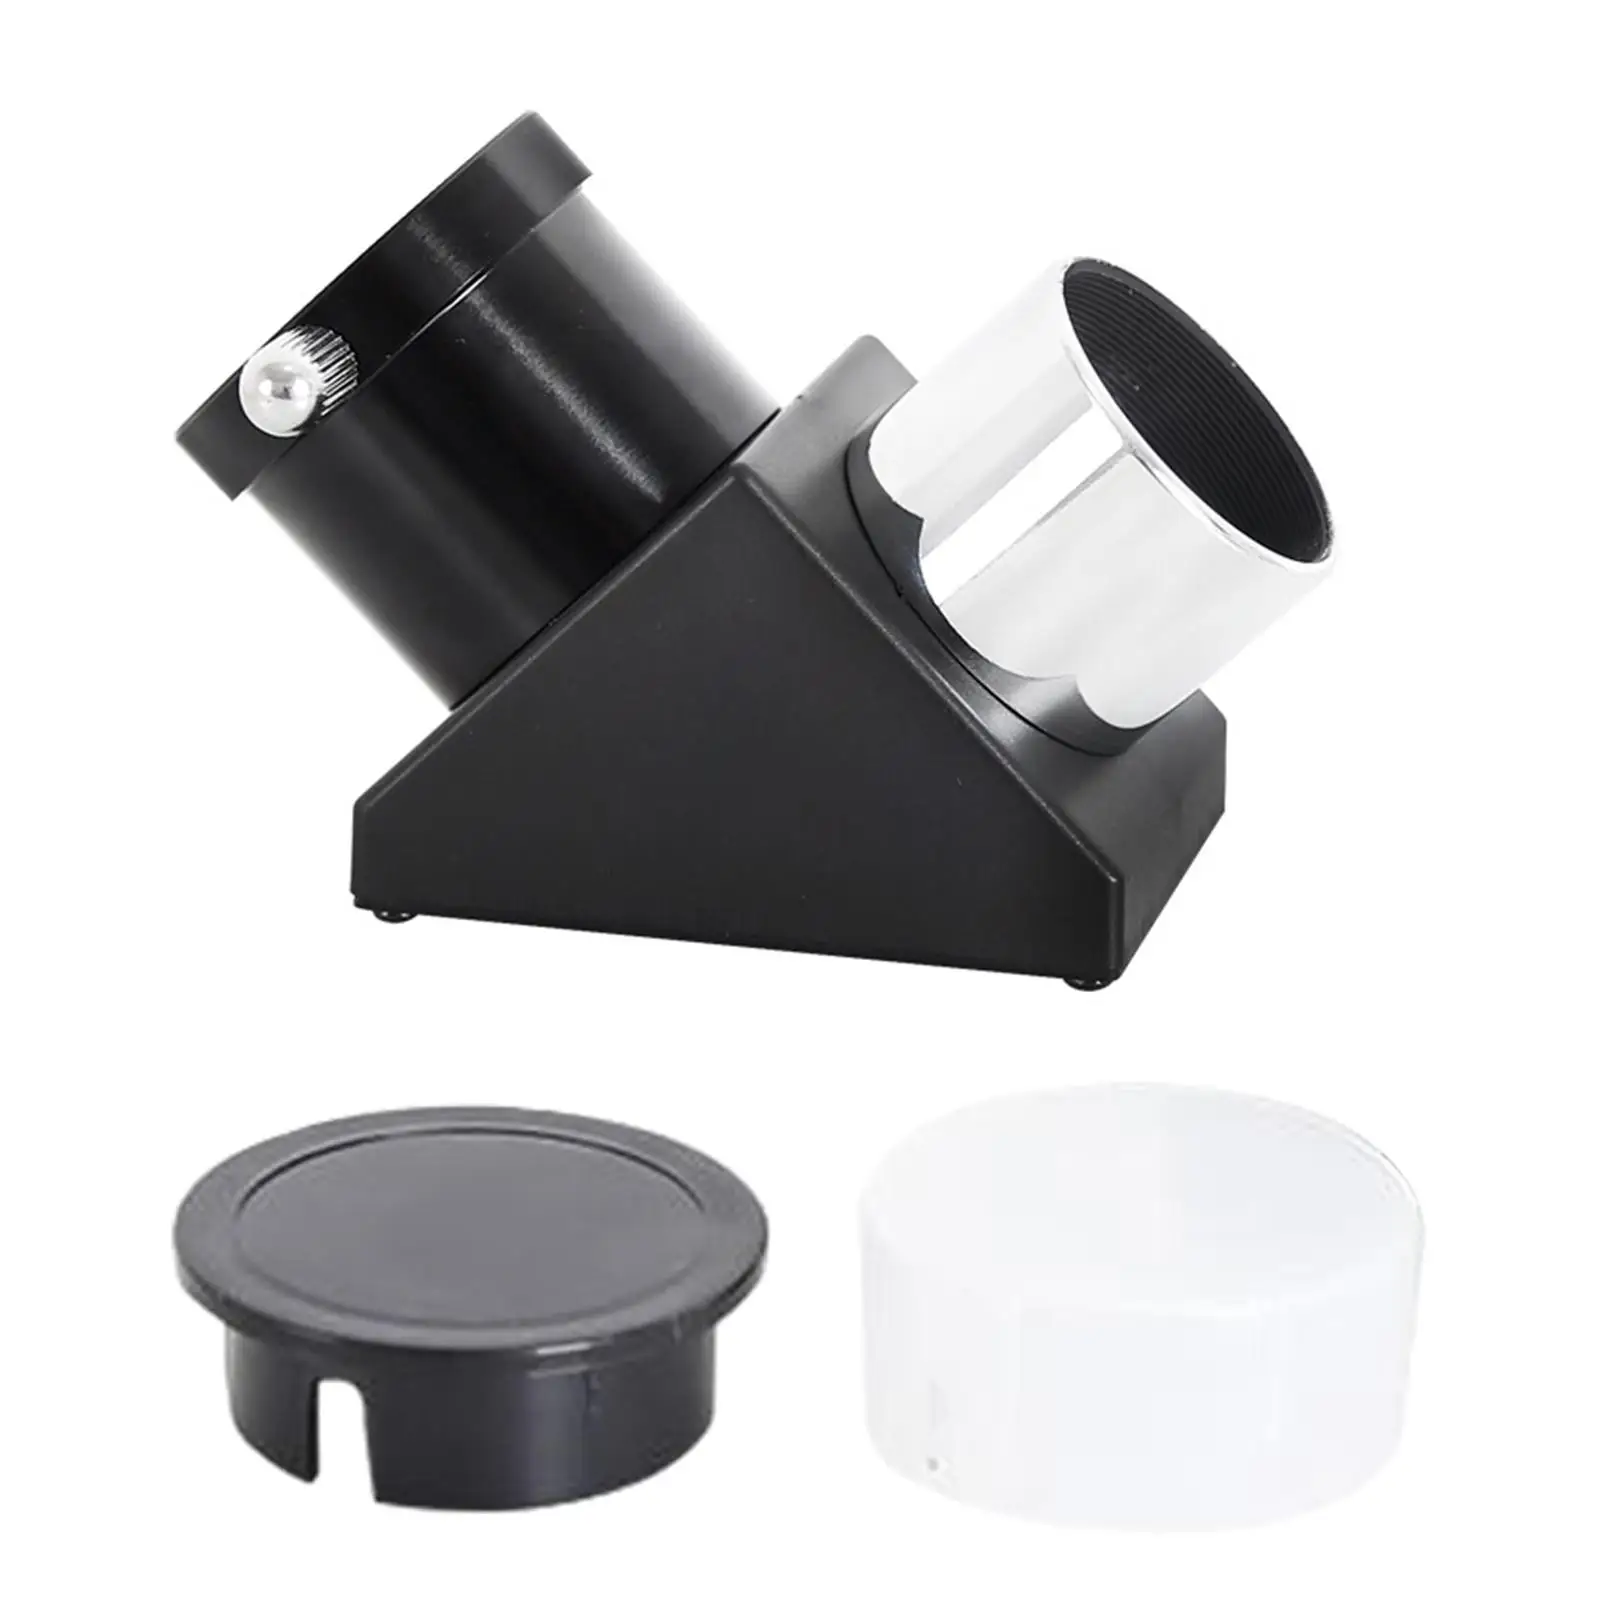 Zeniths Mirror Metal Accessories for Refracting Telescope Eyepiece Lens Astronomical Visual Astrophotography Universal Supplies